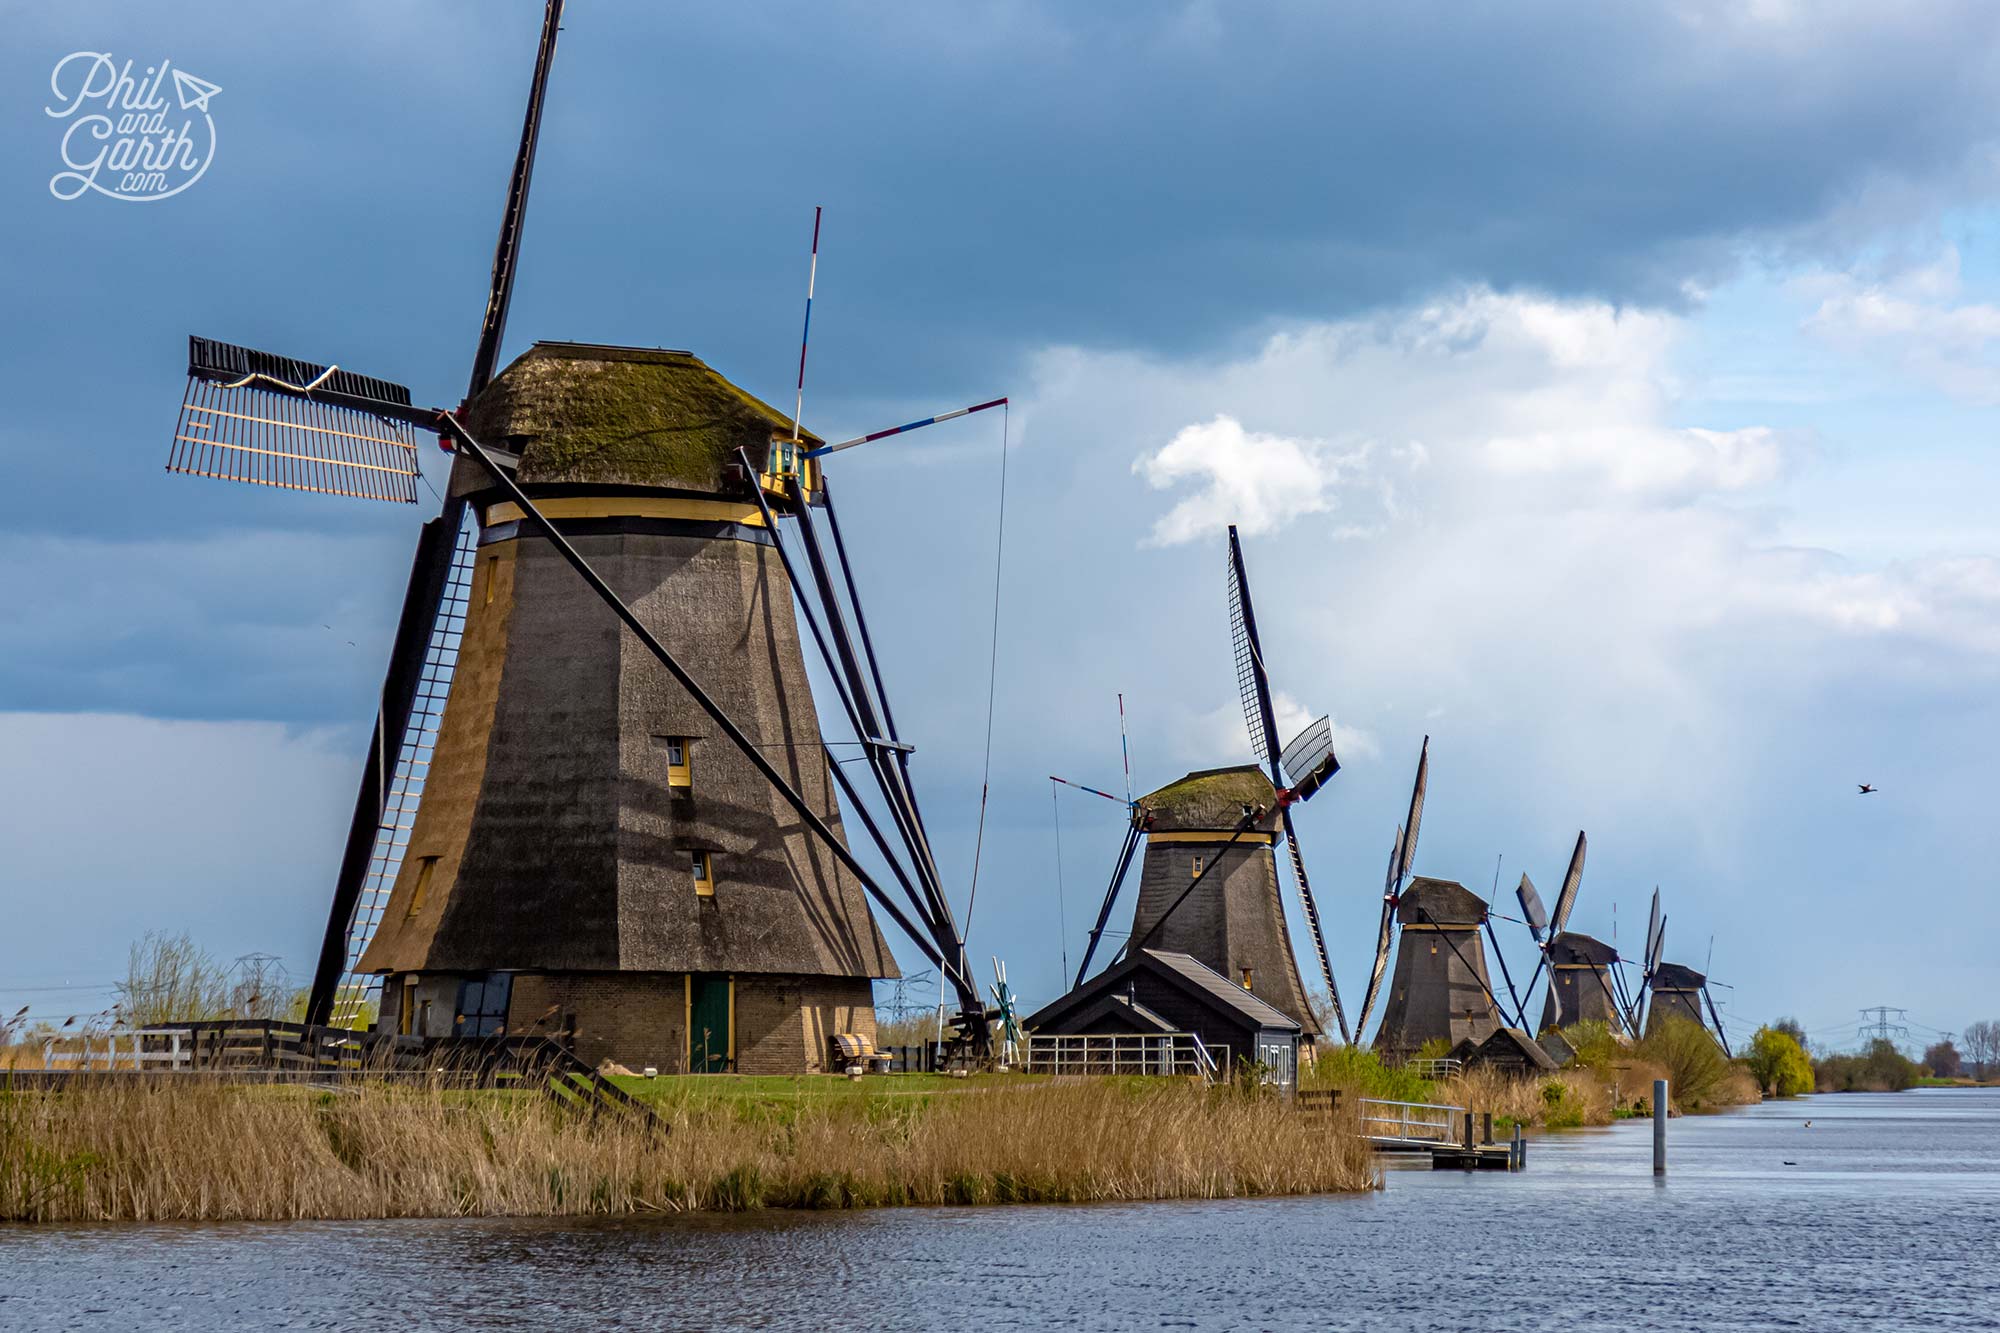 The famous Kinderdijk windmills, so picturesque and quintessentially Dutch